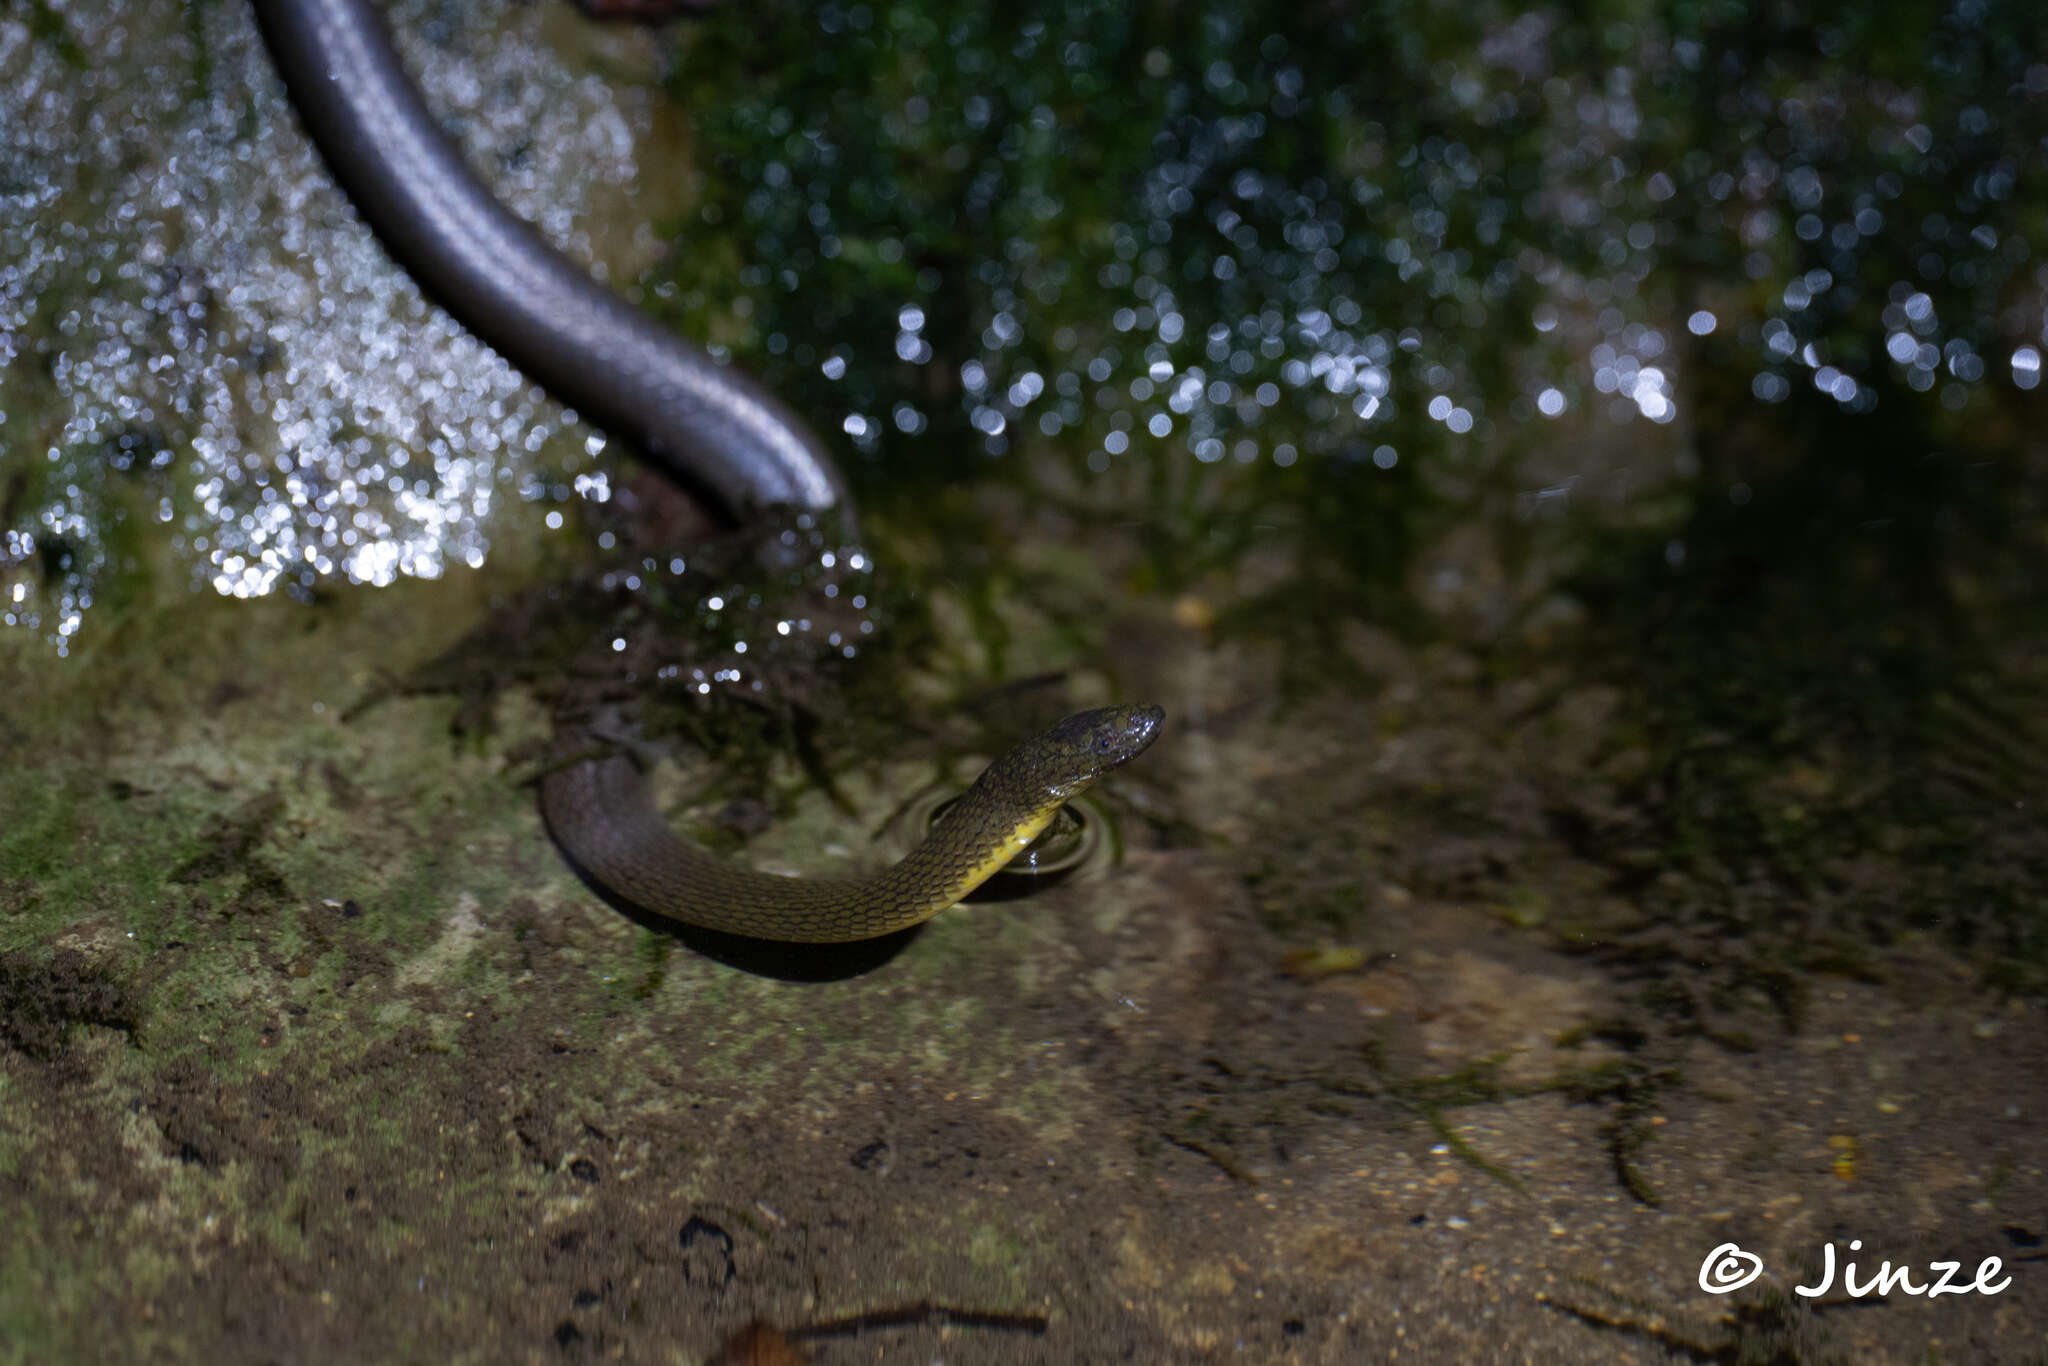 Image of Anderson's Mountain Keelback